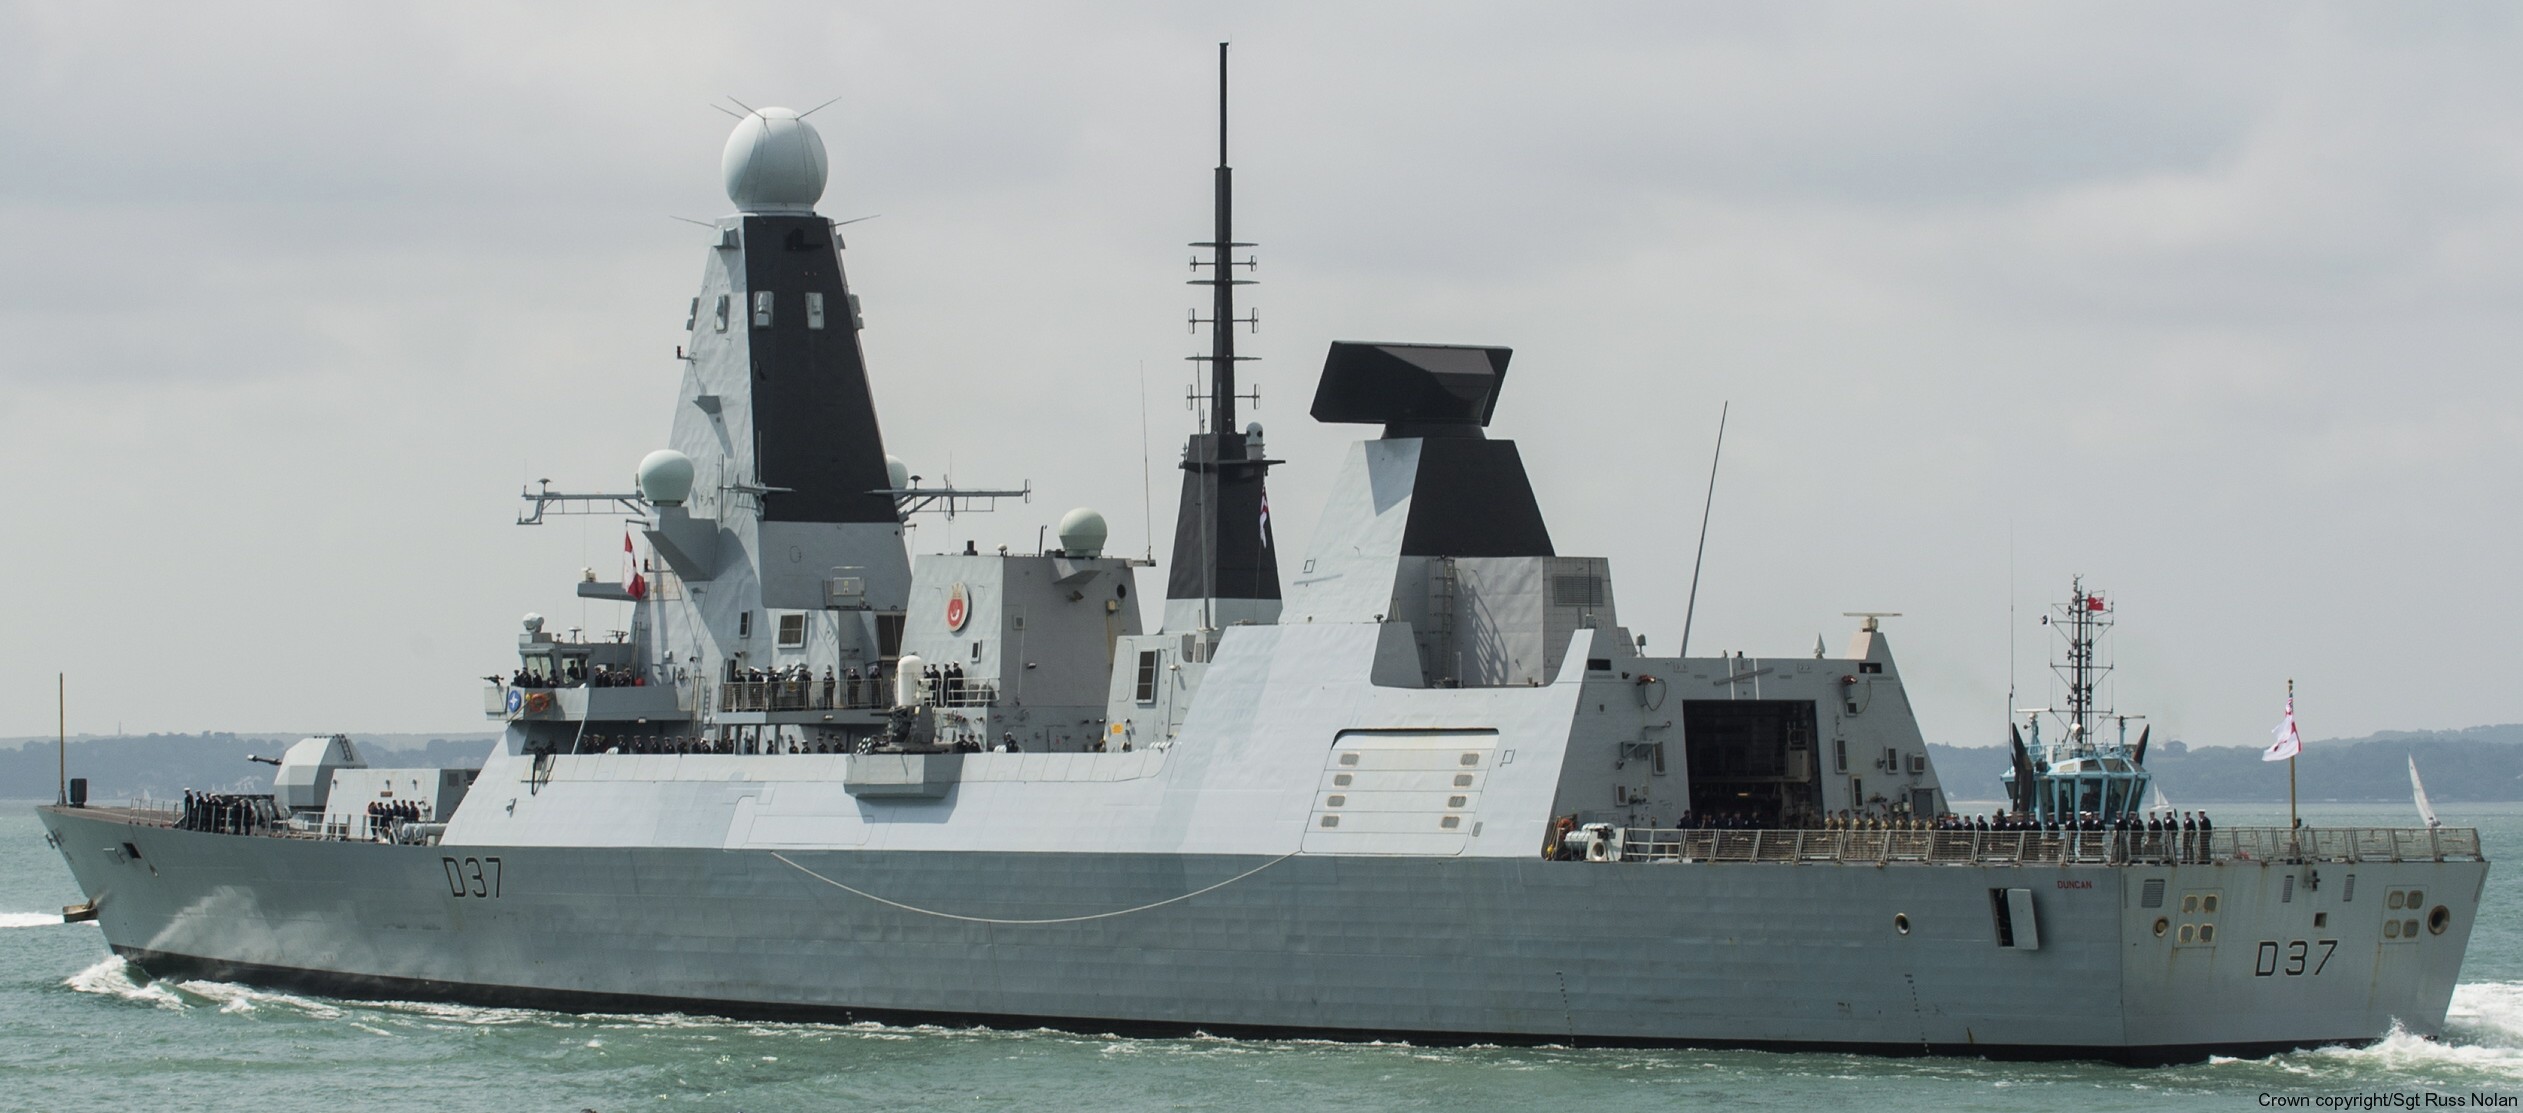 d37 hms duncan d-37 type 45 daring class guided missile destroyer ddg royal navy sea viper 65